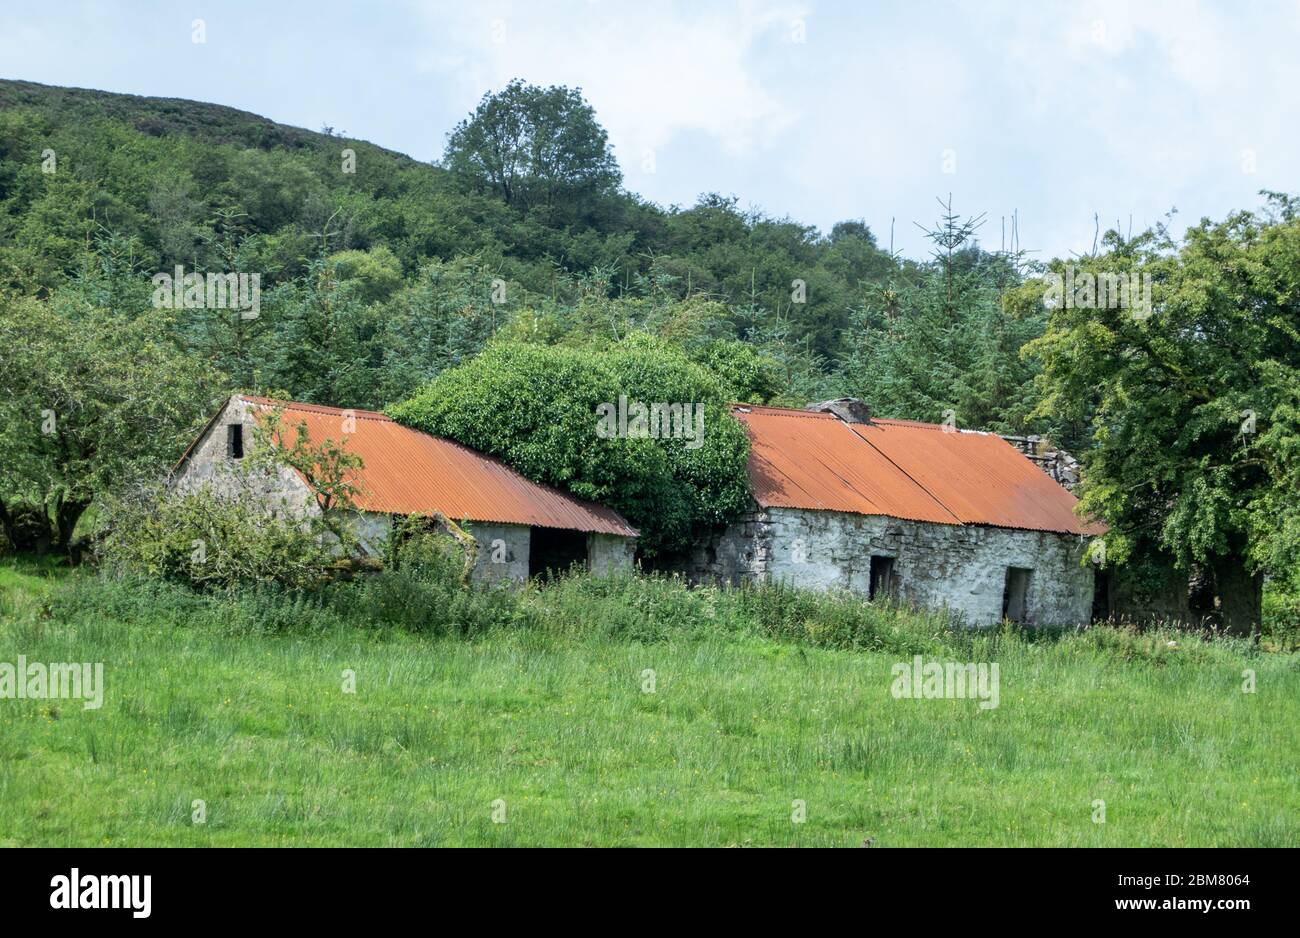 Two abandoned houses in the country side, Co. Fermanagh, Northern Ireland Stock Photo